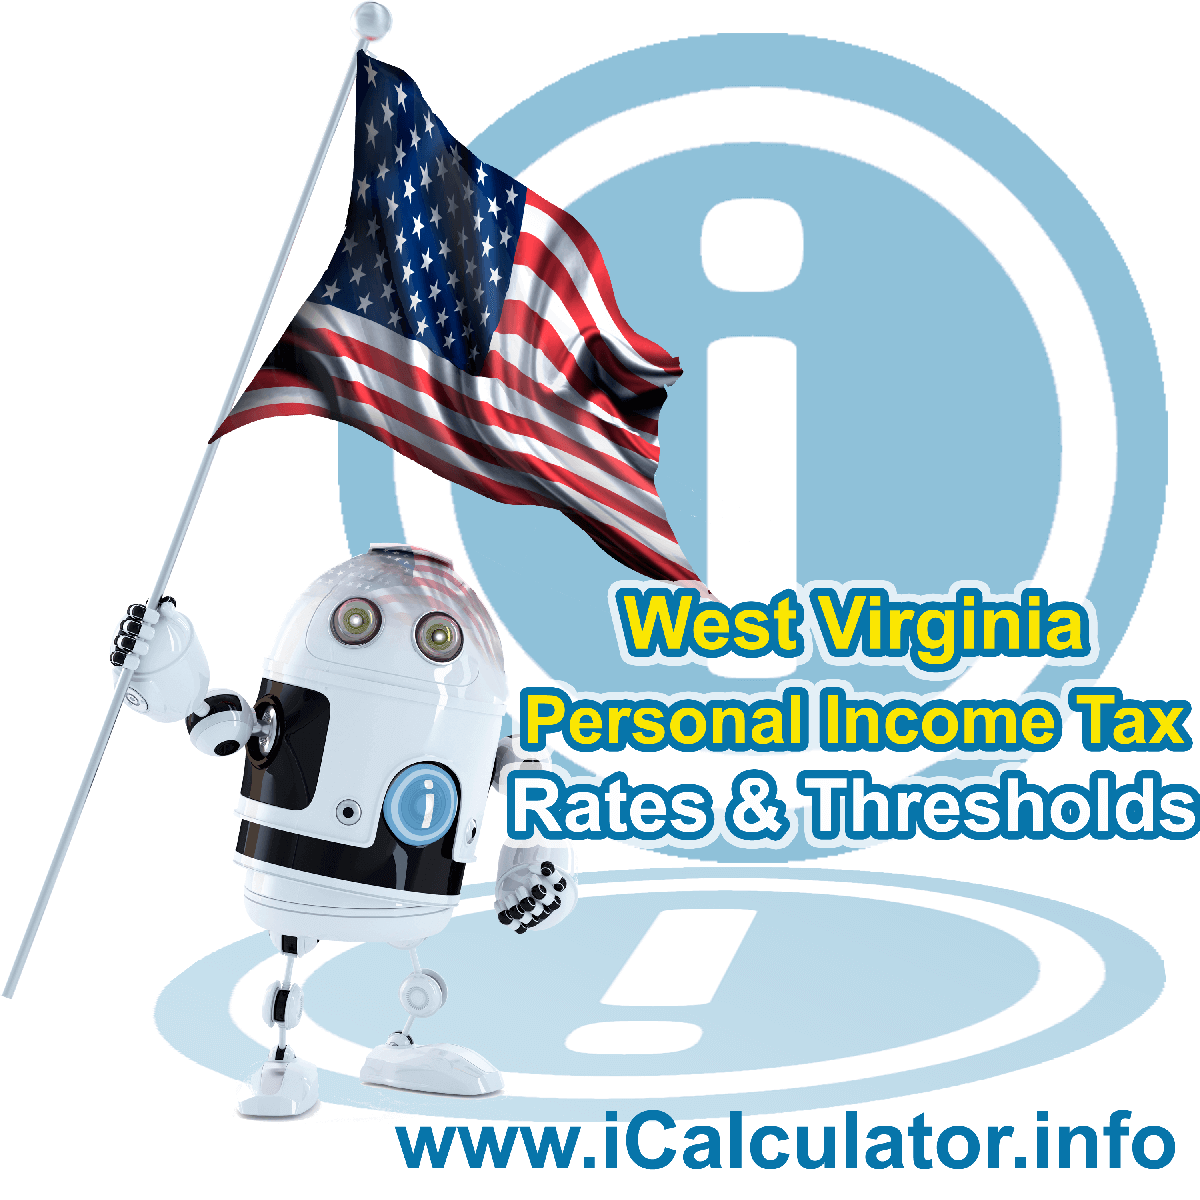 West Virginia State Tax Tables 2015. This image displays details of the West Virginia State Tax Tables for the 2015 tax return year which is provided in support of the 2015 US Tax Calculator